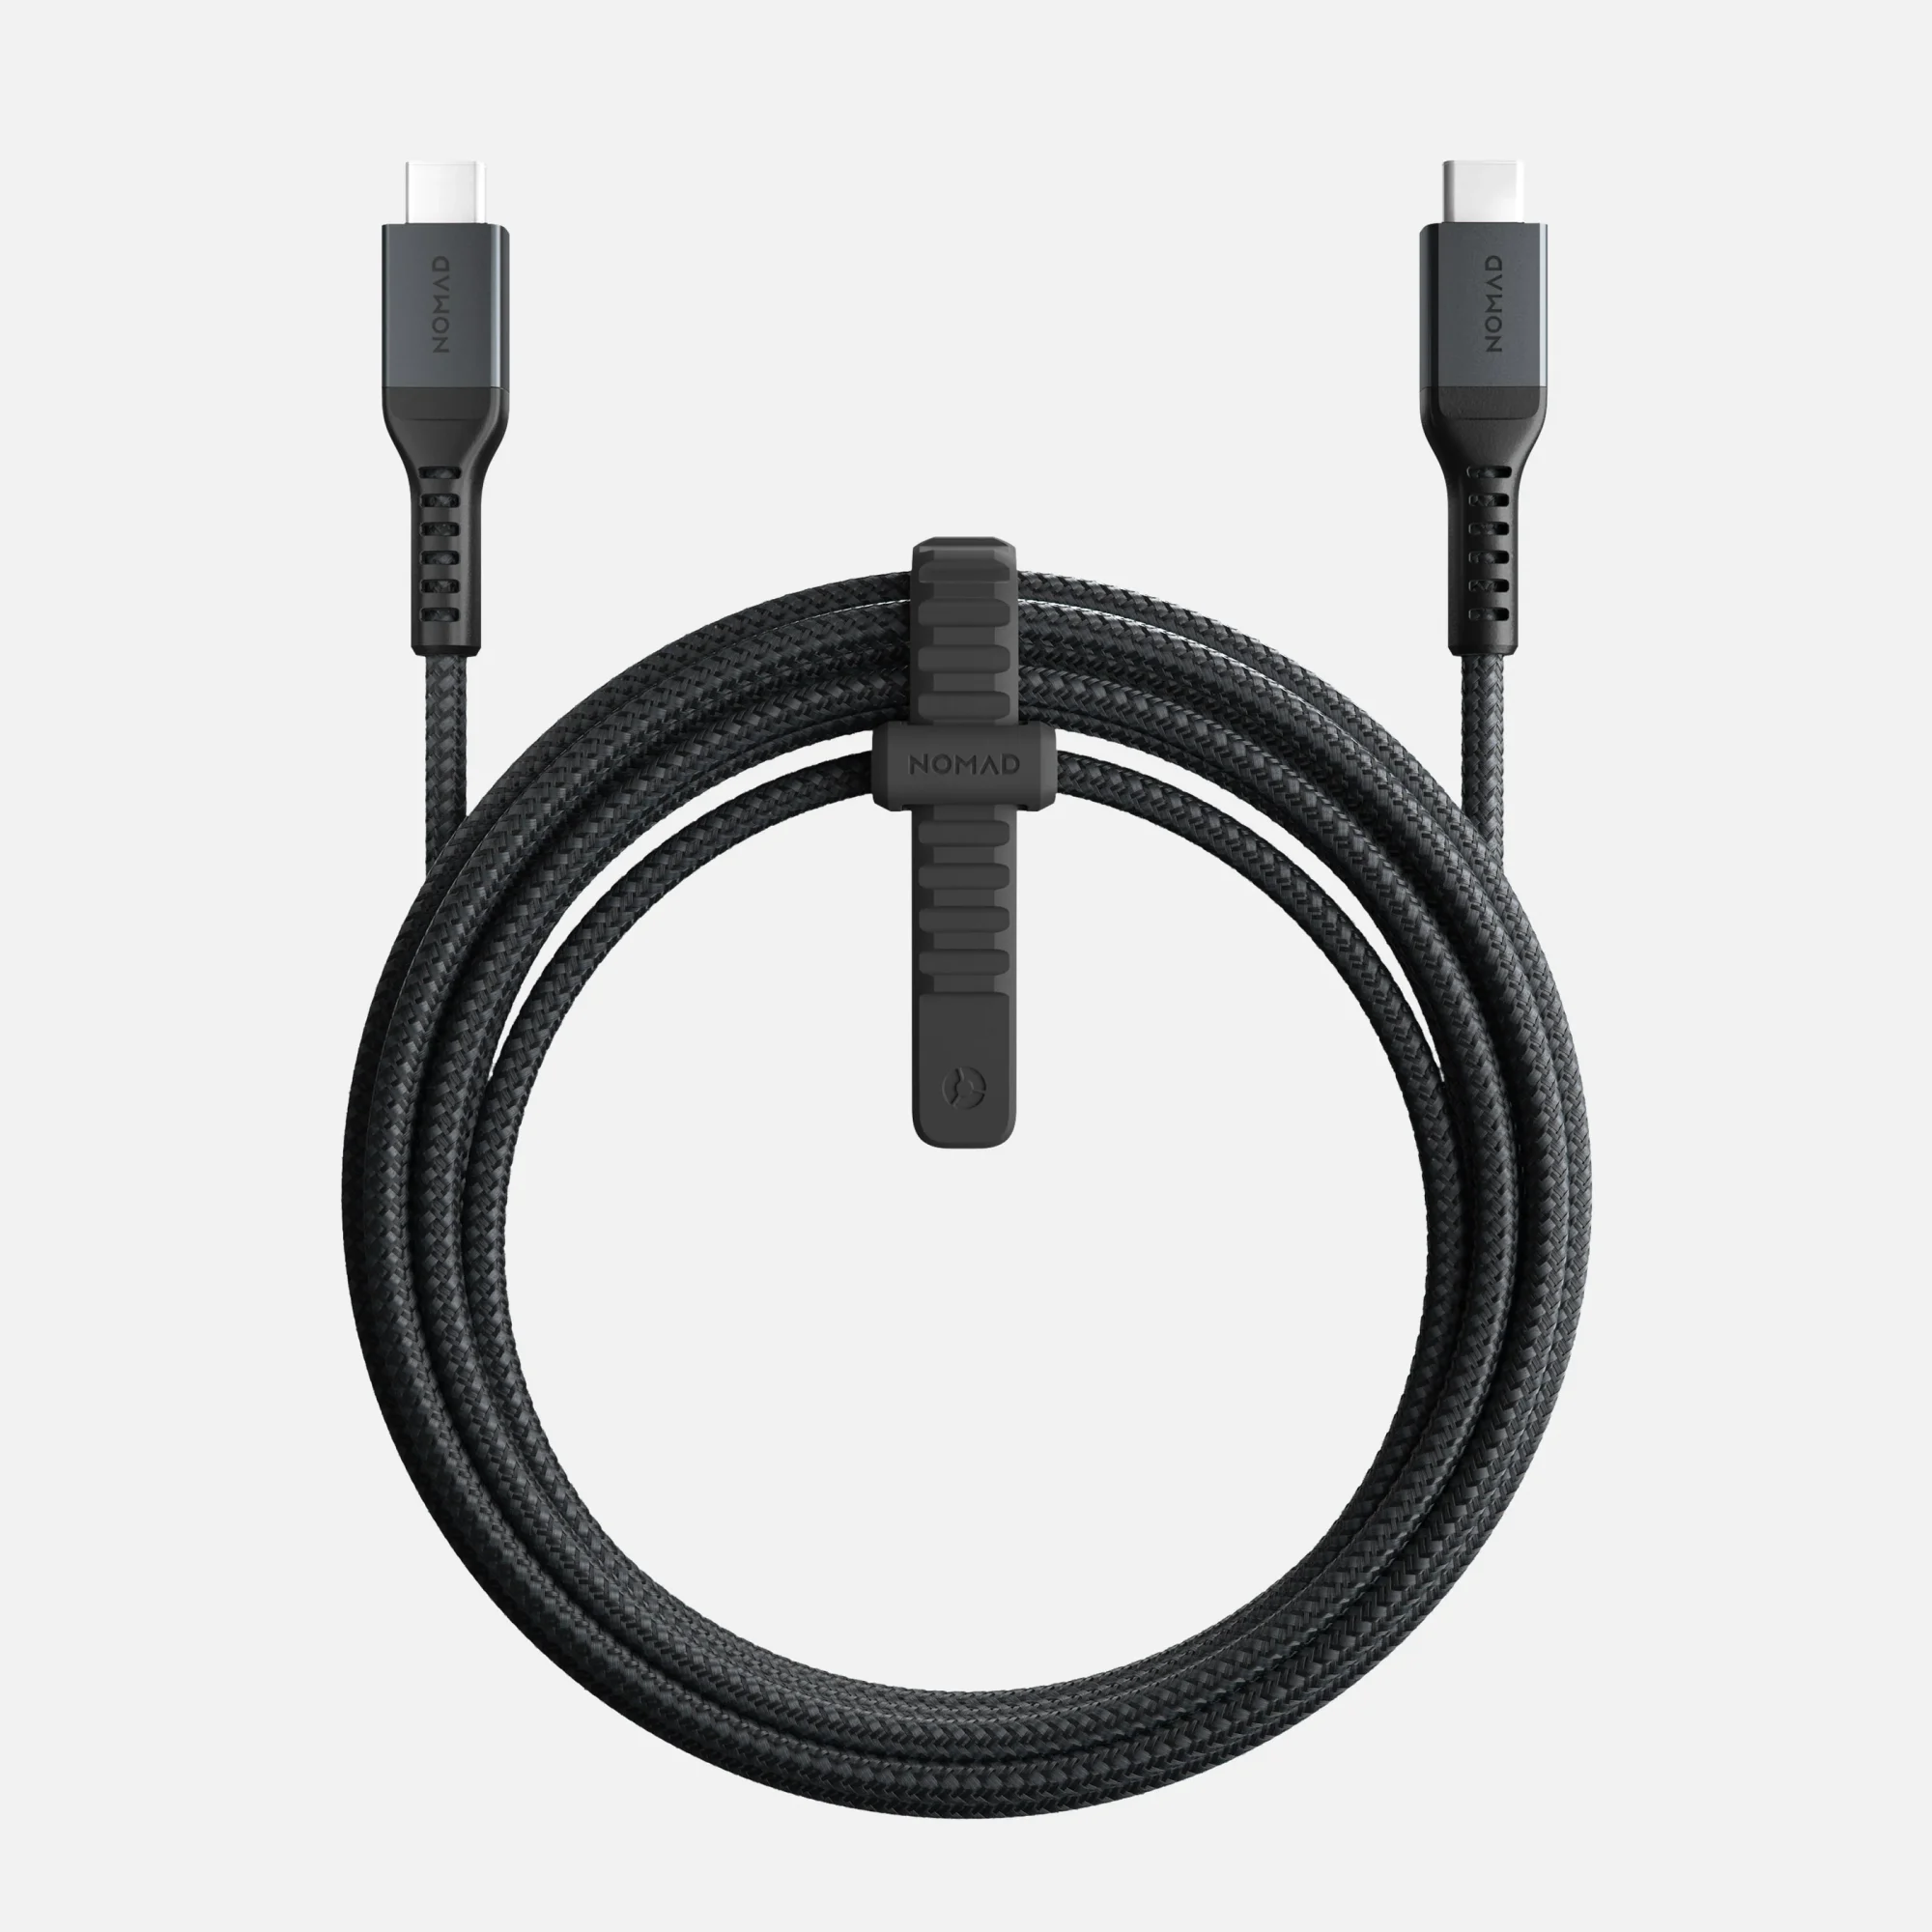 The Nomad USB-C Cable is available in 0.3, 1.5, and 3-meter lengths